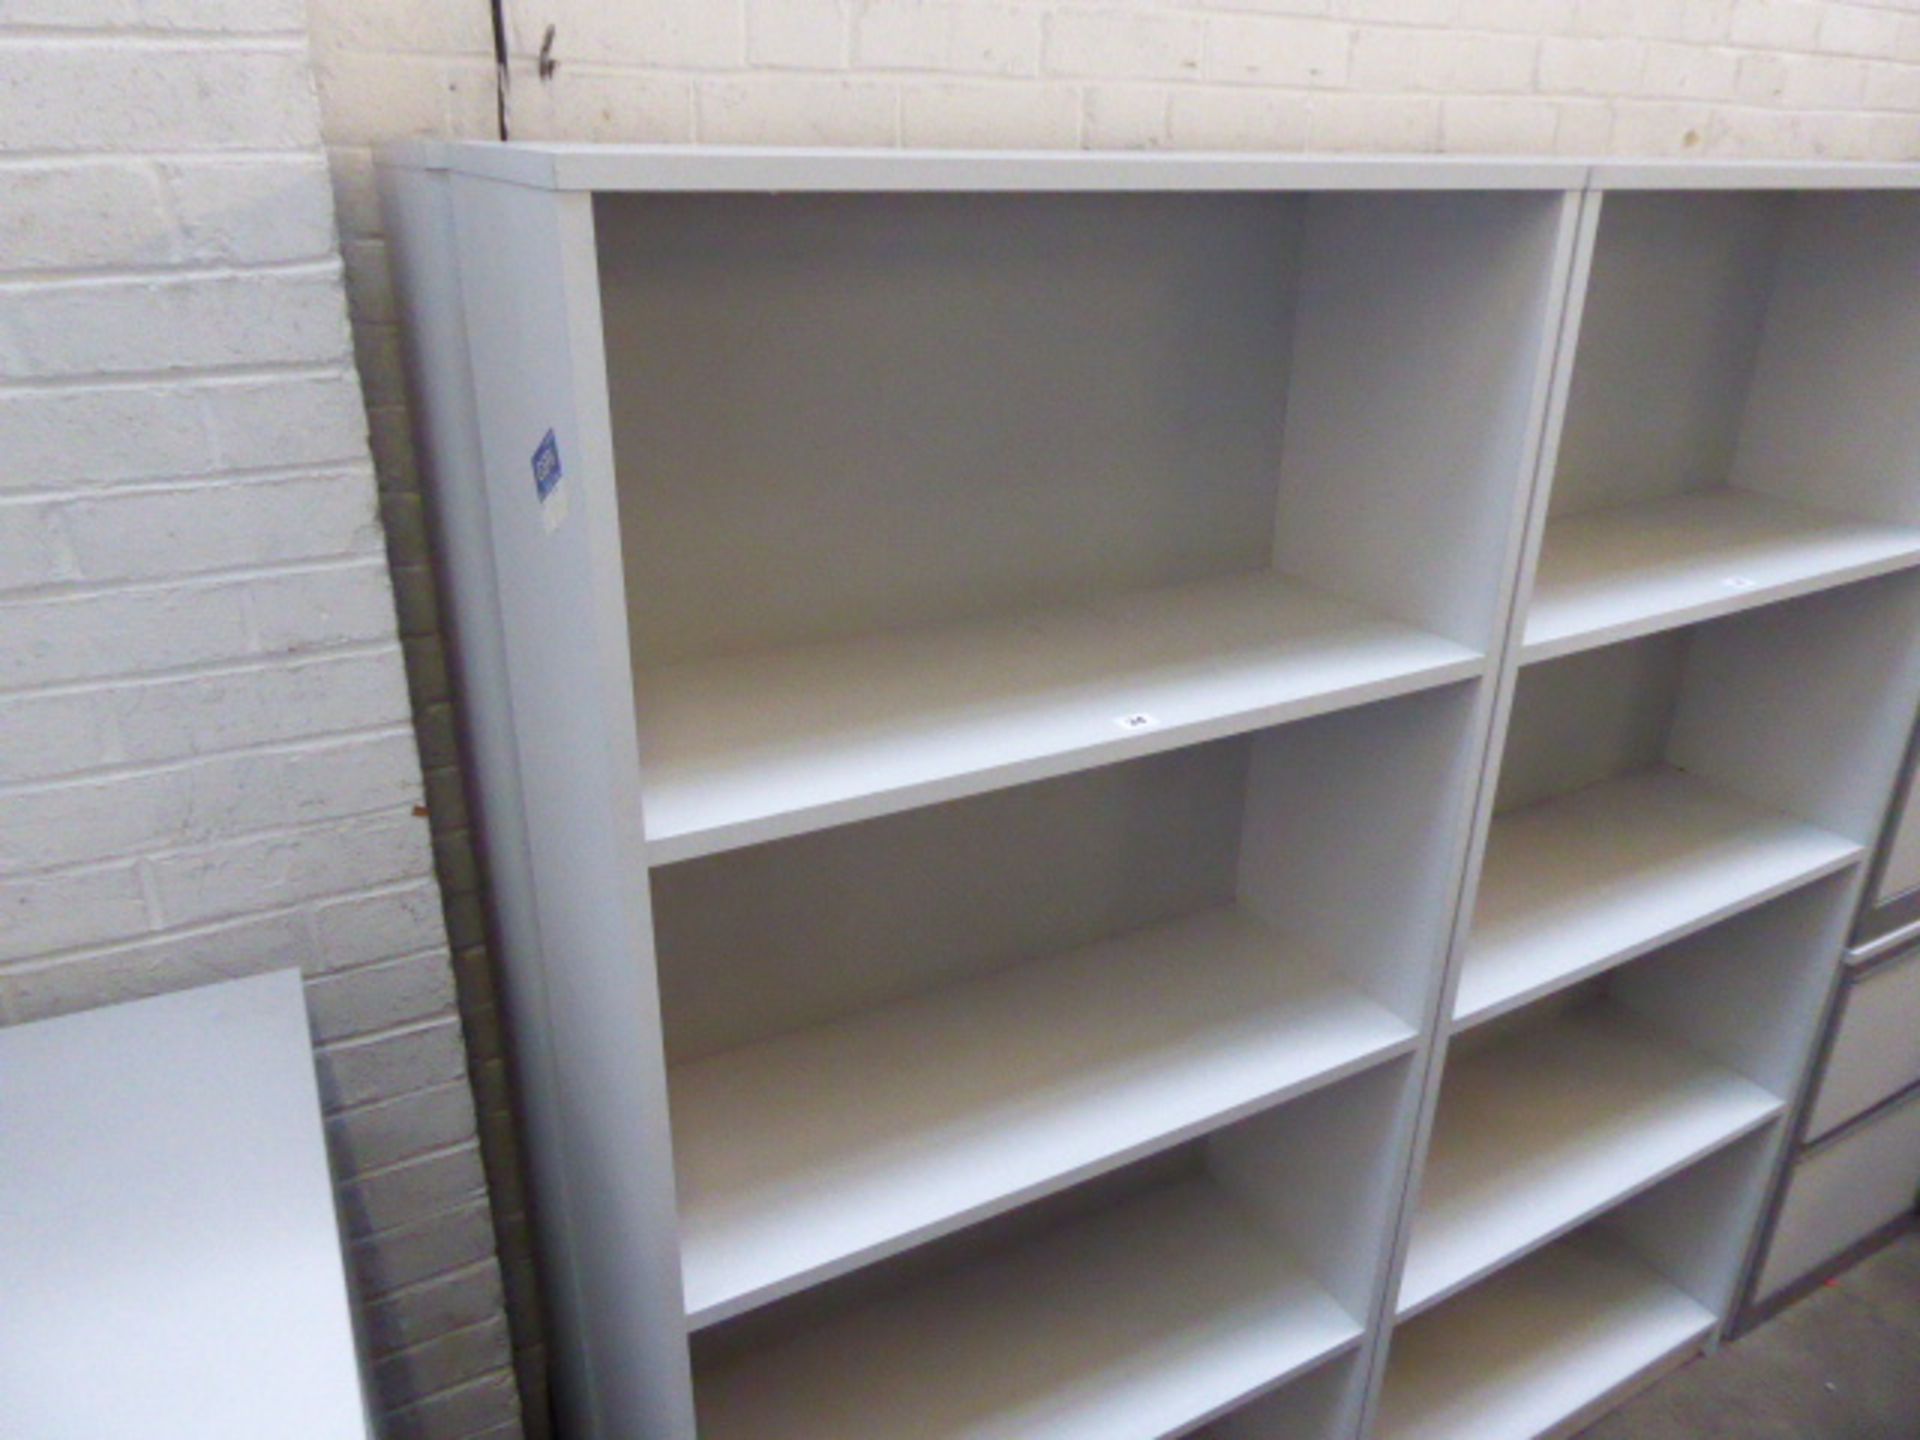 2 75cm wide by 165cm tall open fronted bookshelves